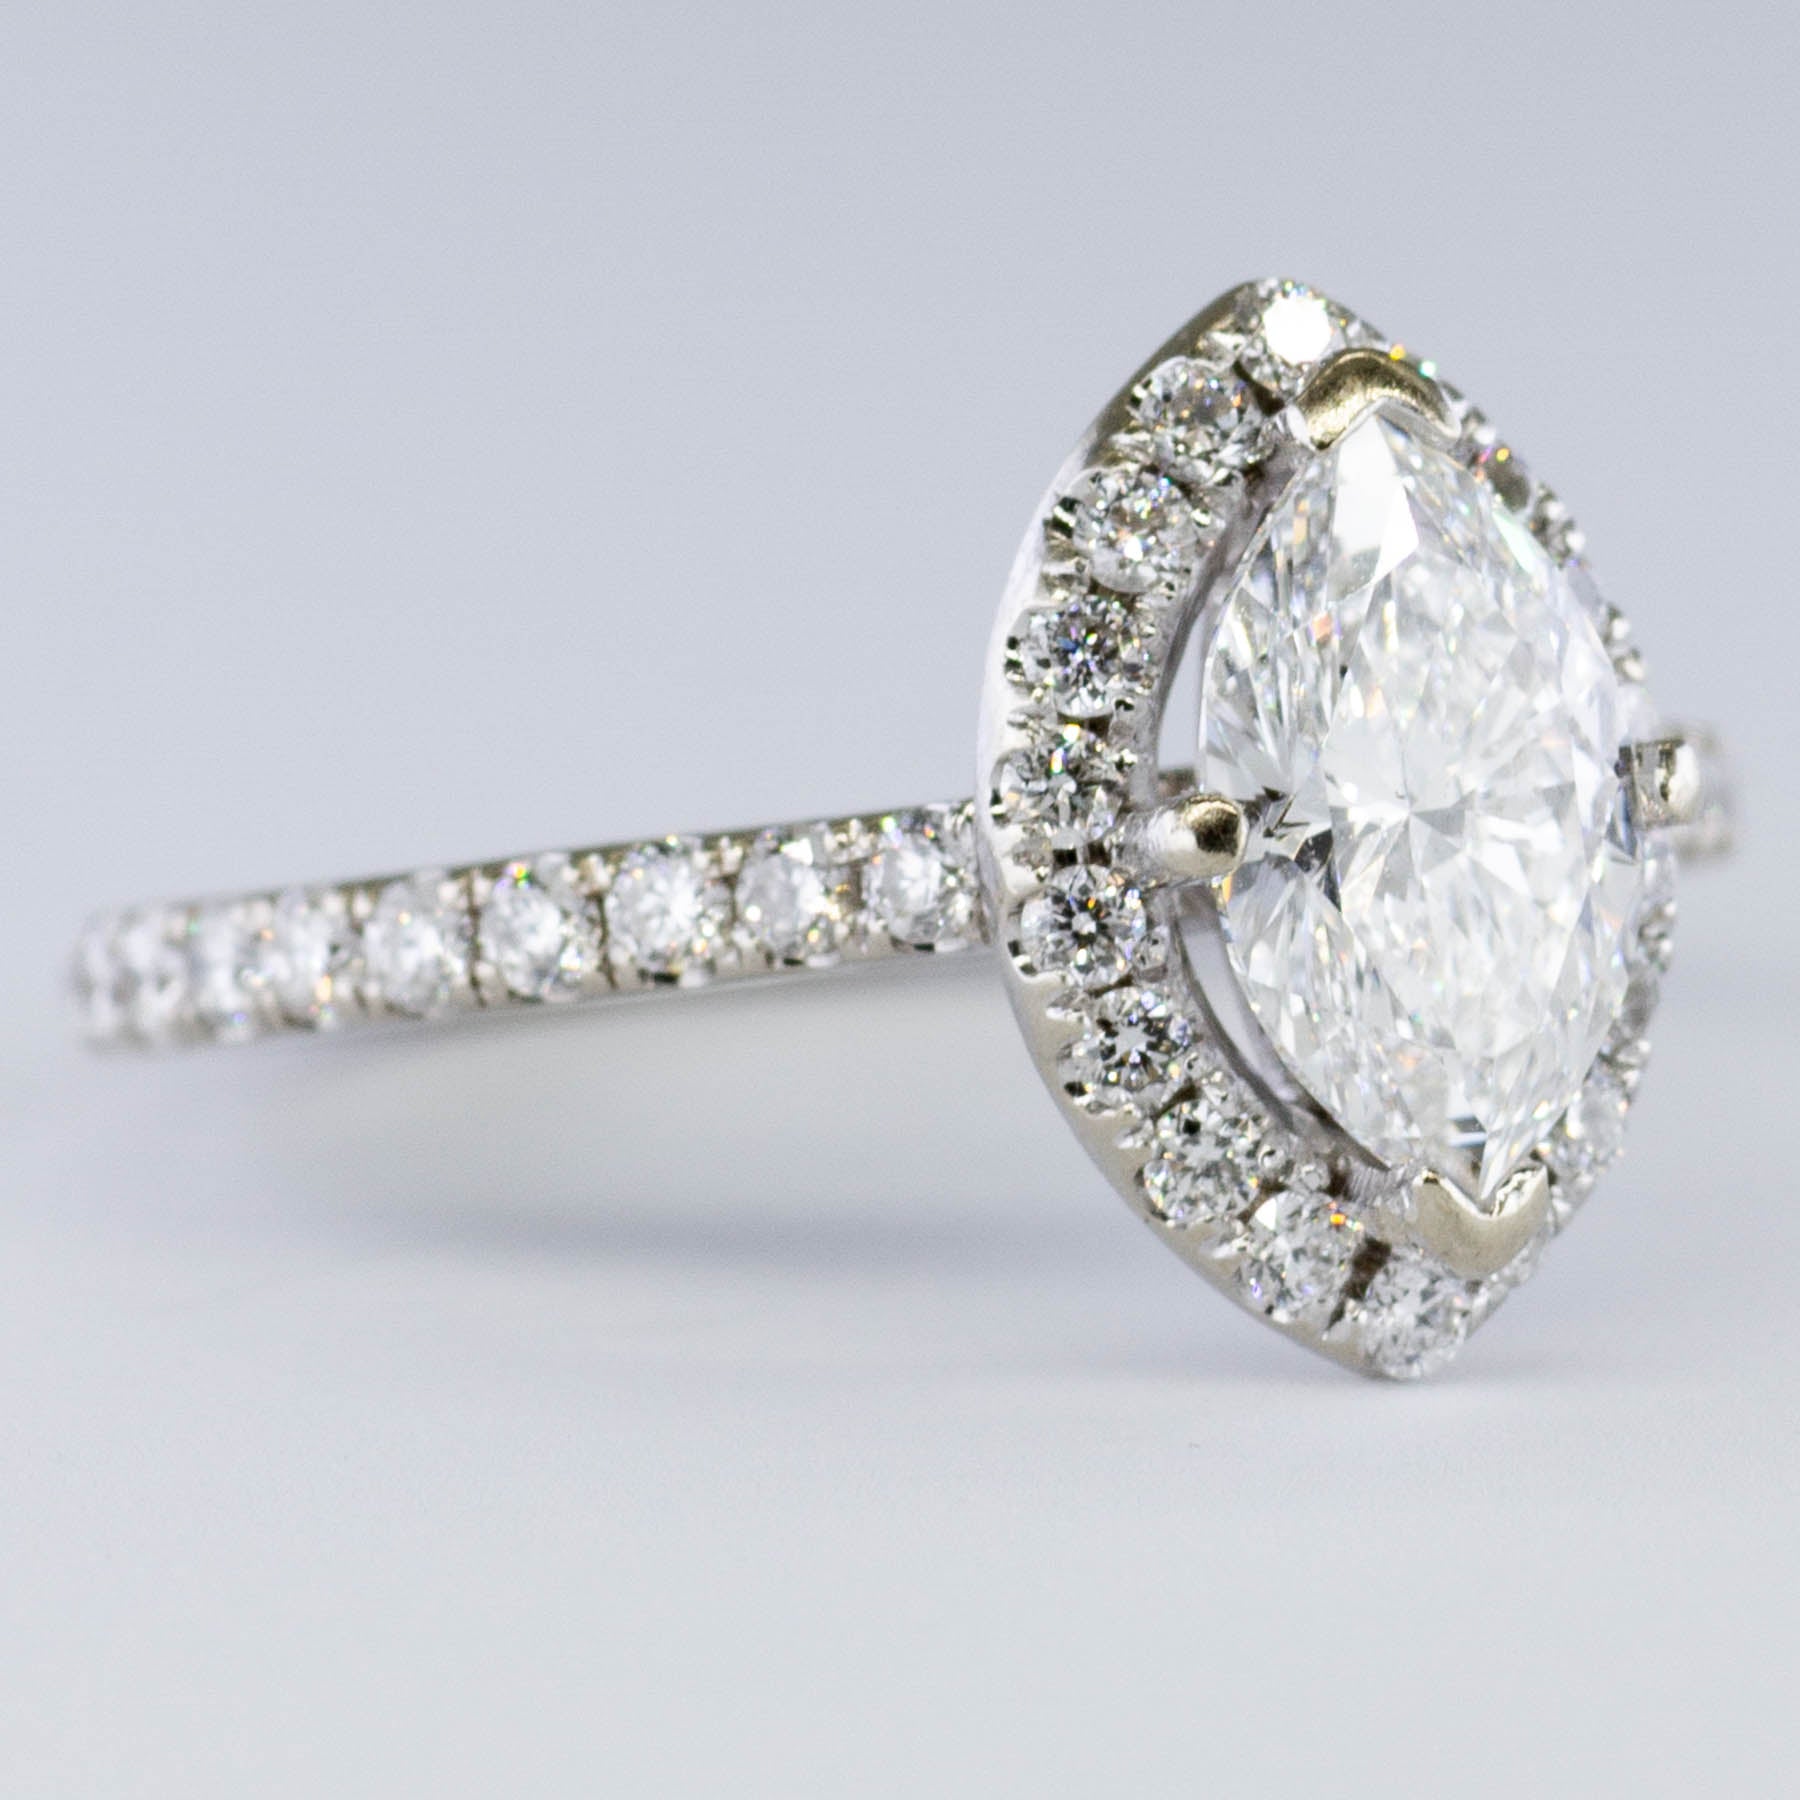 Marquise Cut GIA Certified Diamond Engagement Ring | 1.48ctw | VS1 E | SZ 8.75 |